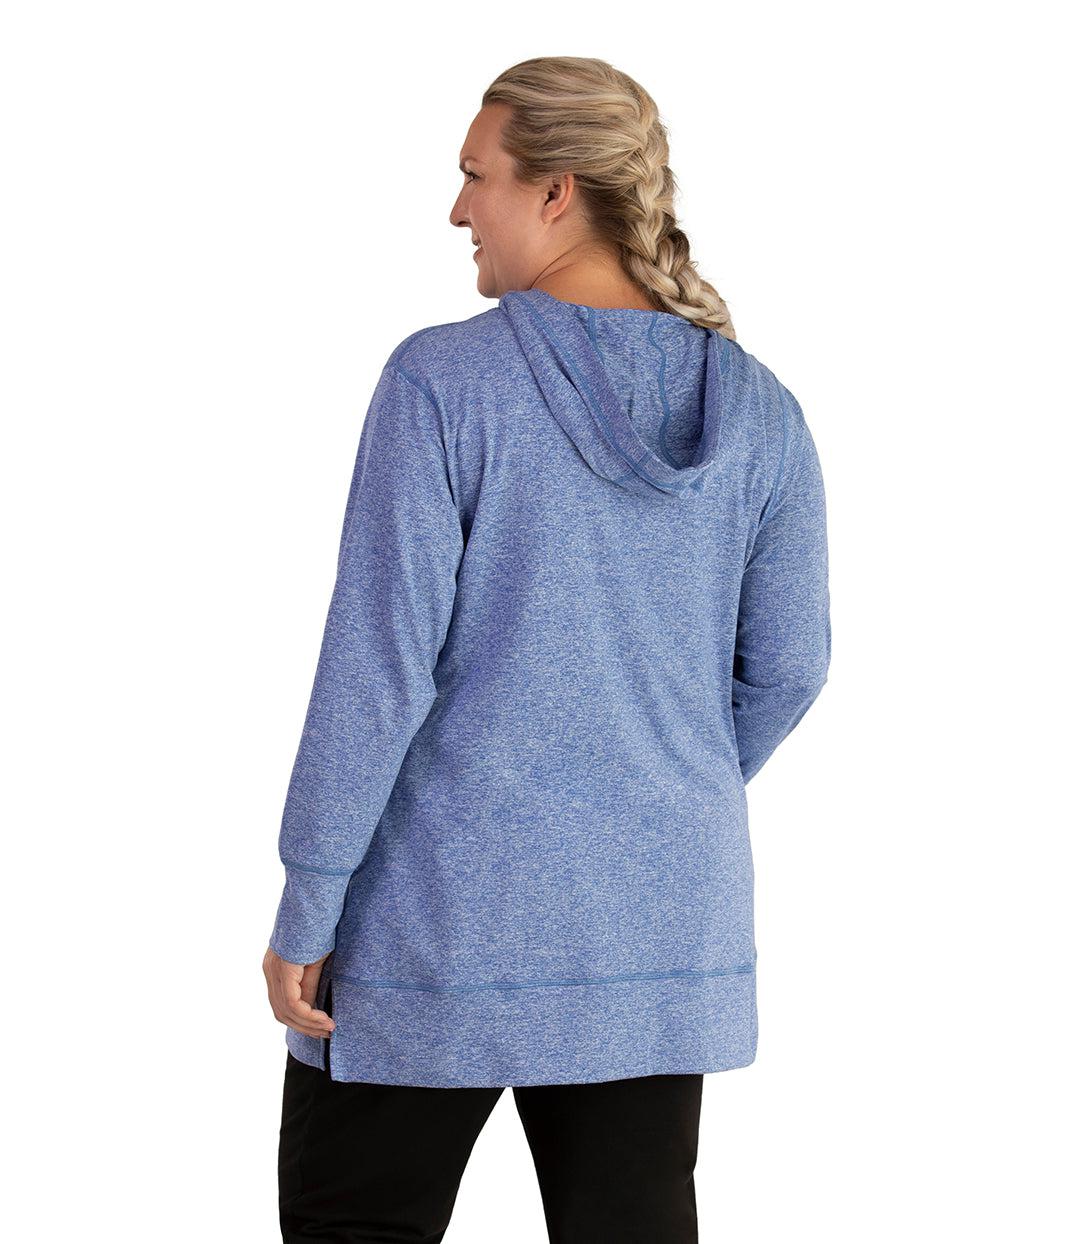 Plus size woman, facing back looking left, wearing JunoActive plus size SoftWik Long Sleeve Hoodie in the color Heather Royal. She is wearing JunoActive Plus Size Leggings in the color Black.